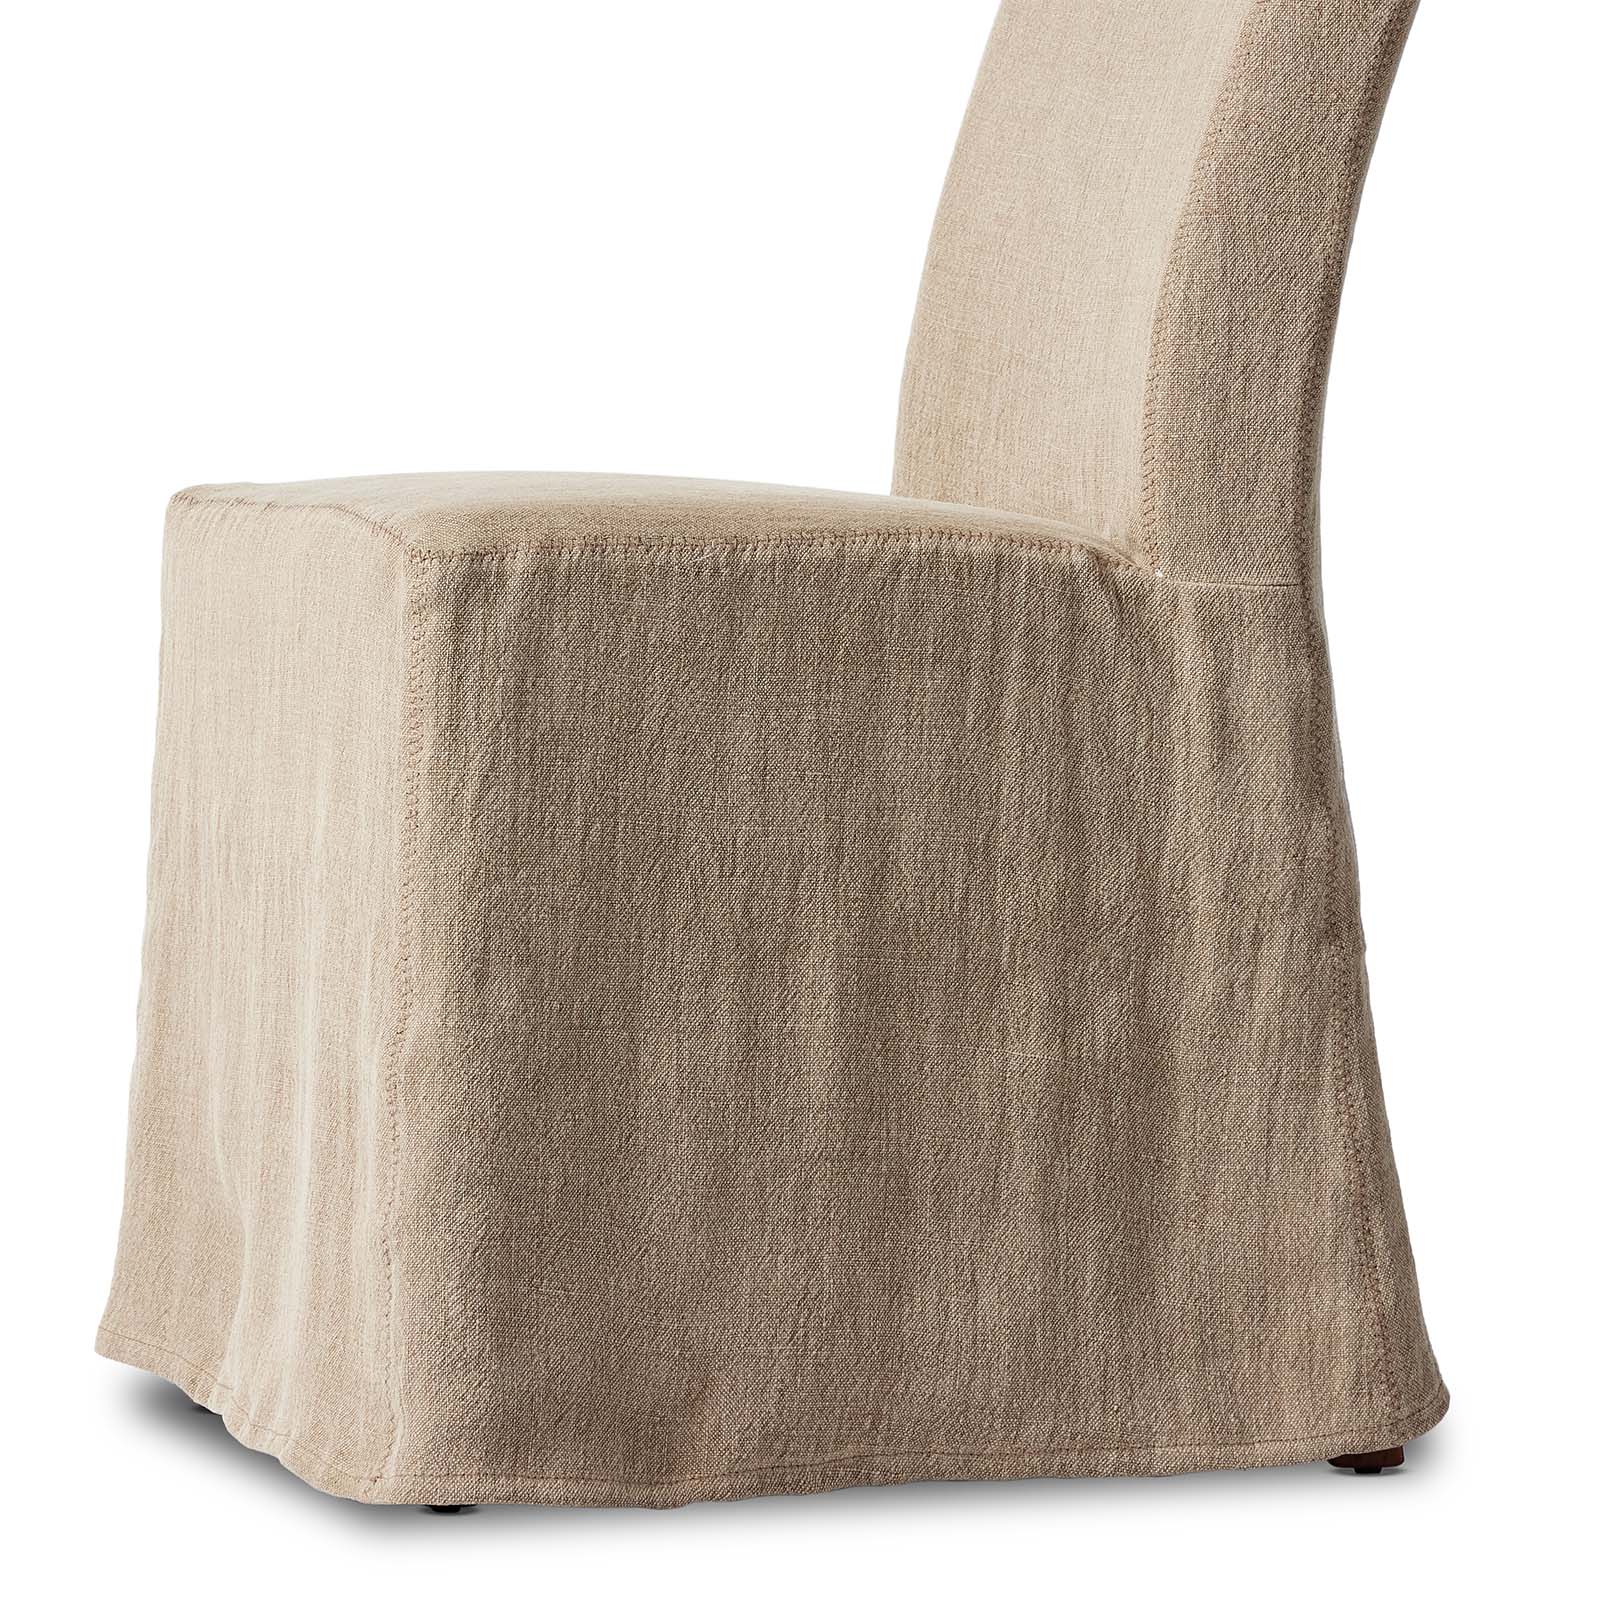 Bante Dining Chair